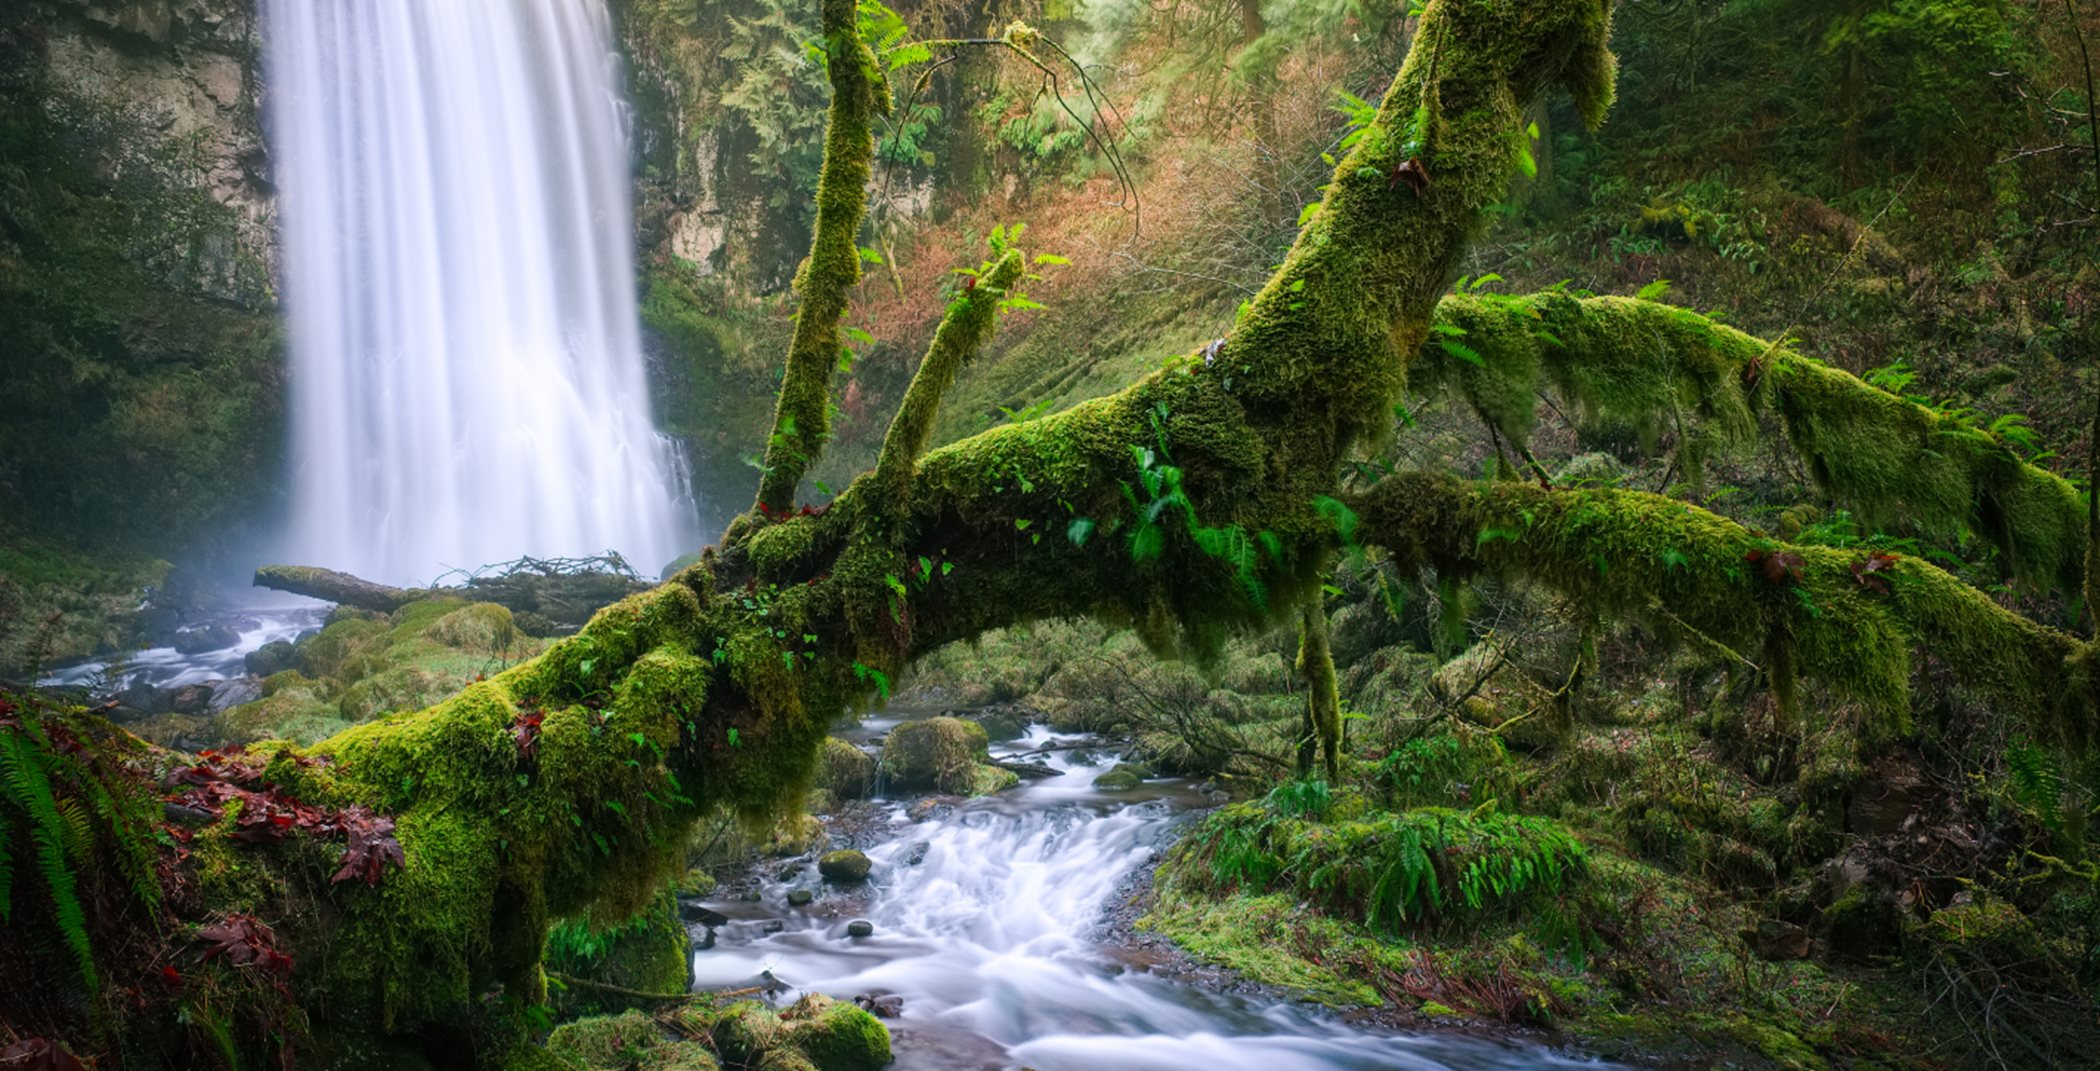 Waterfall in a mossy forest